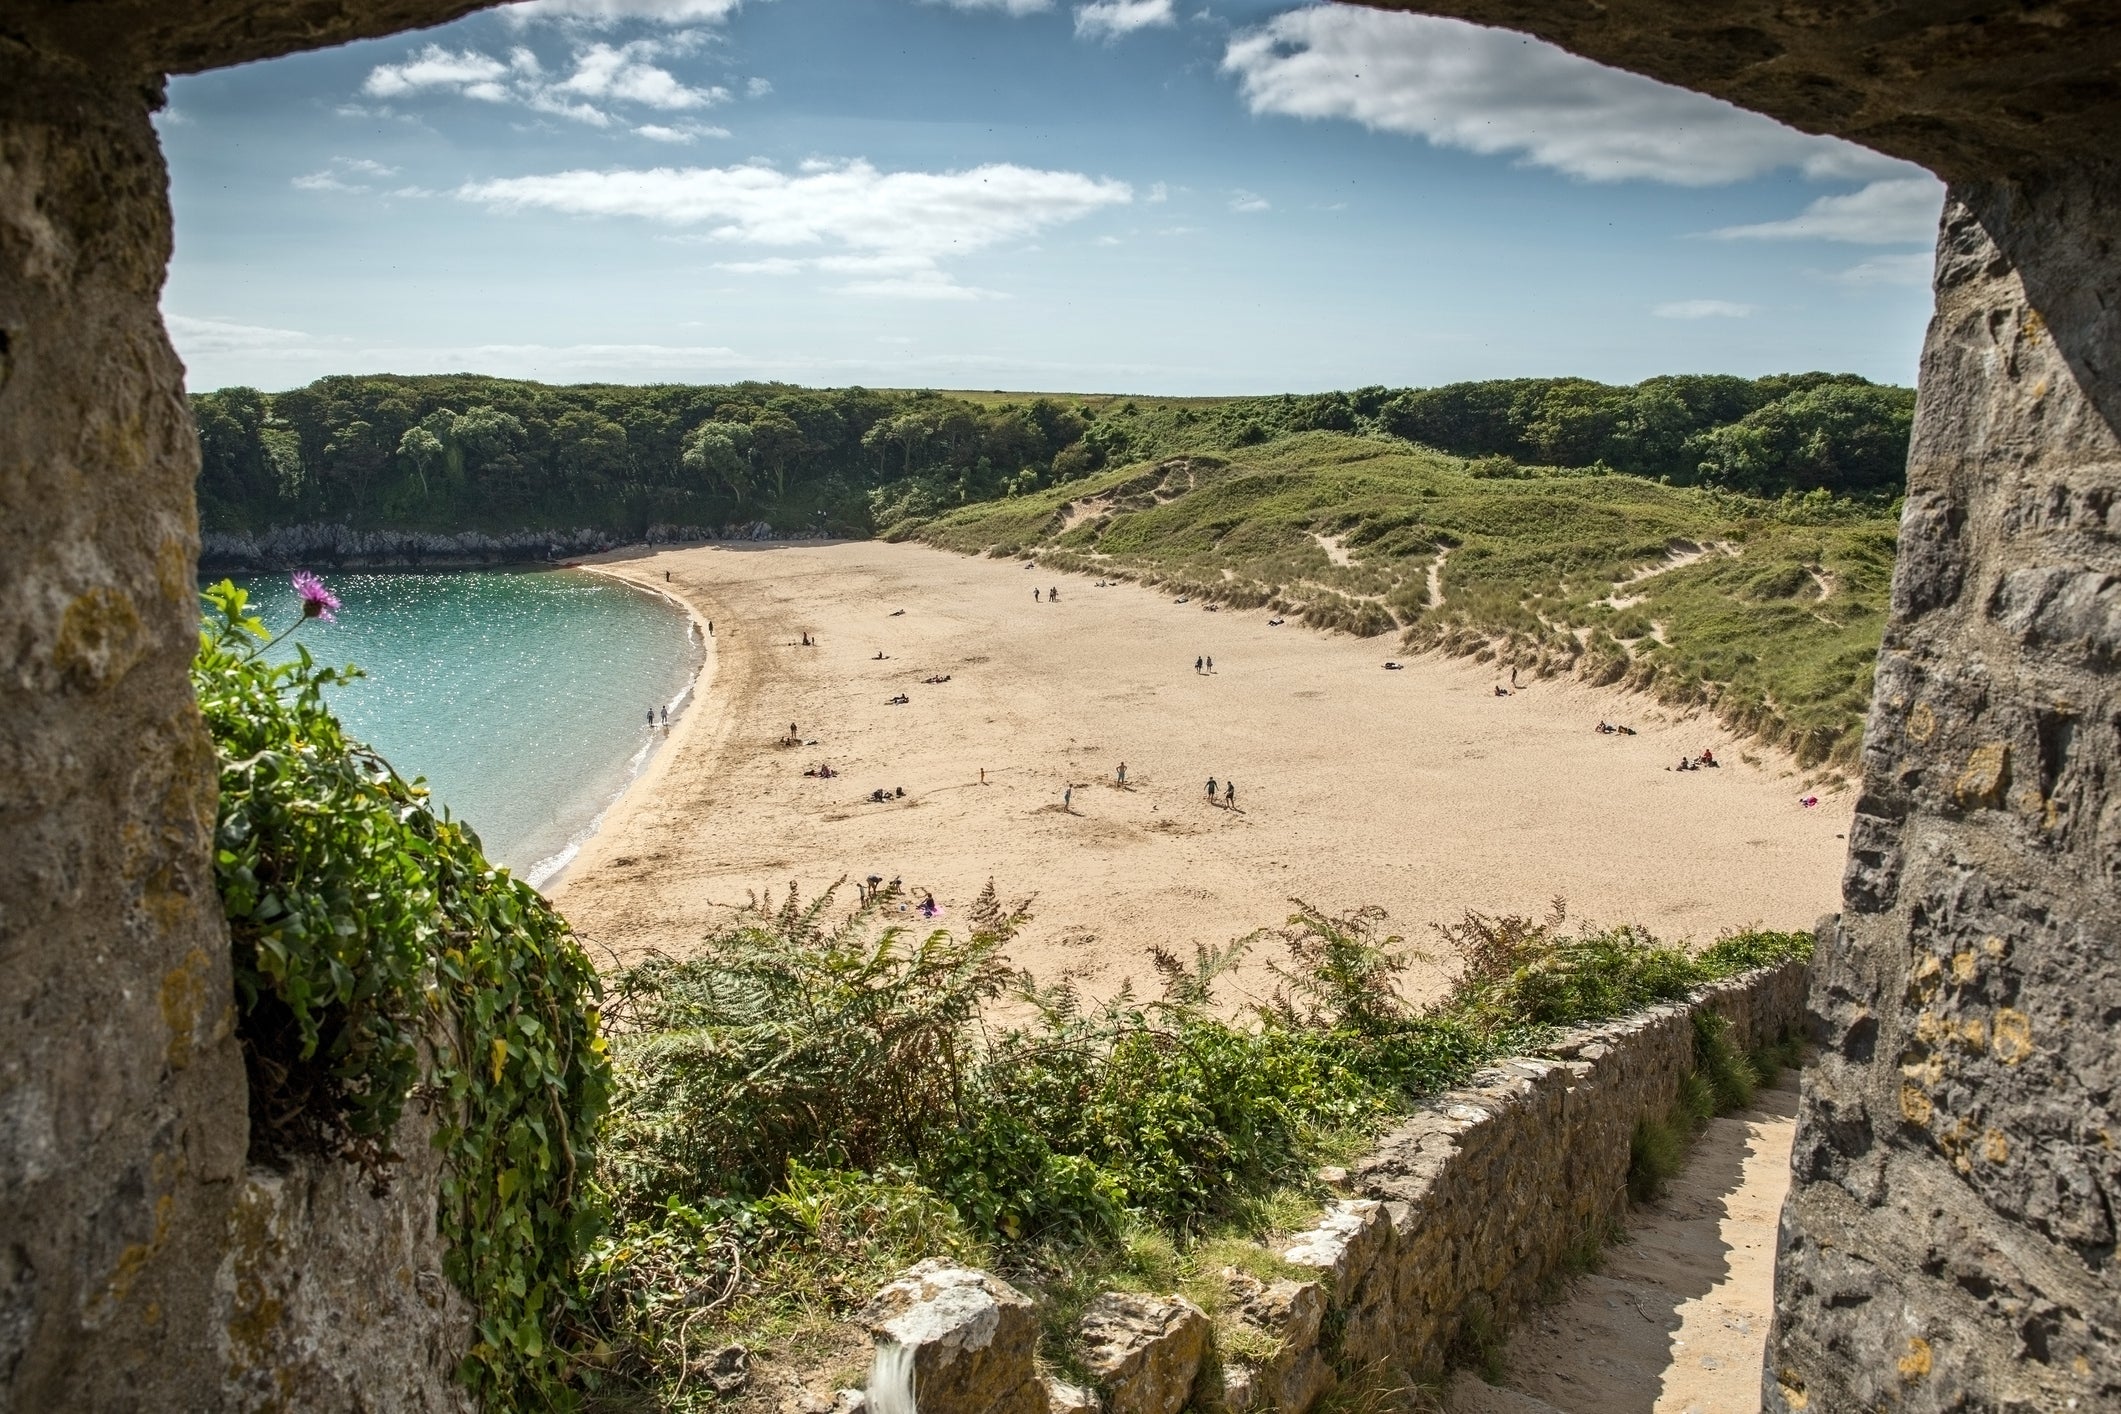 Some of Pembrokeshire’s beaches have been voted among the prettiest in the world